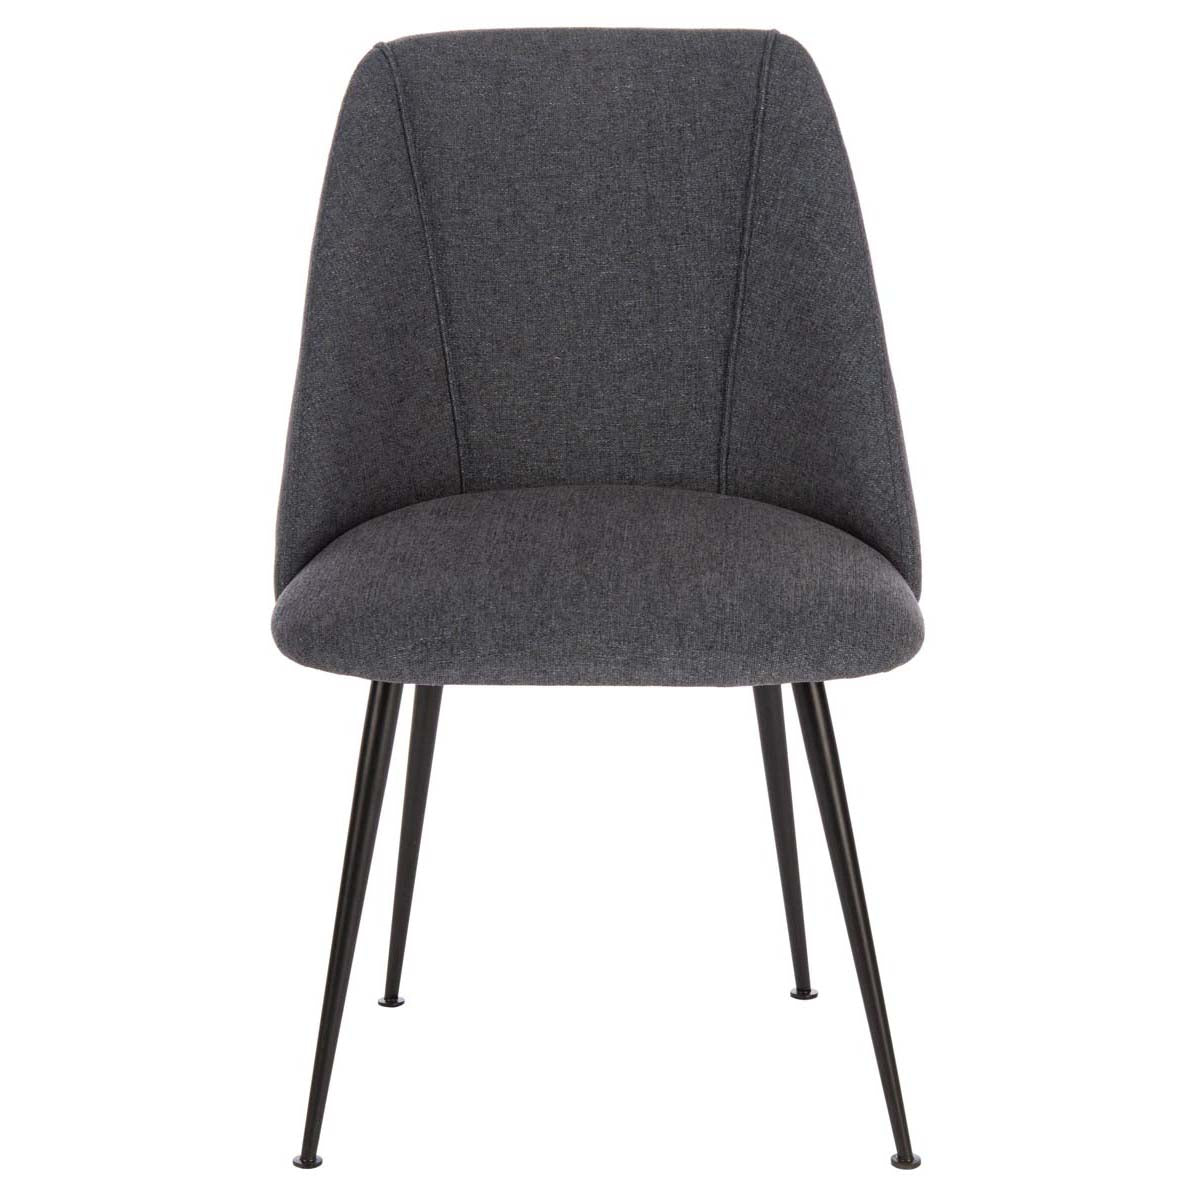 Safavieh Couture Foster Poly Blend Dining Chair